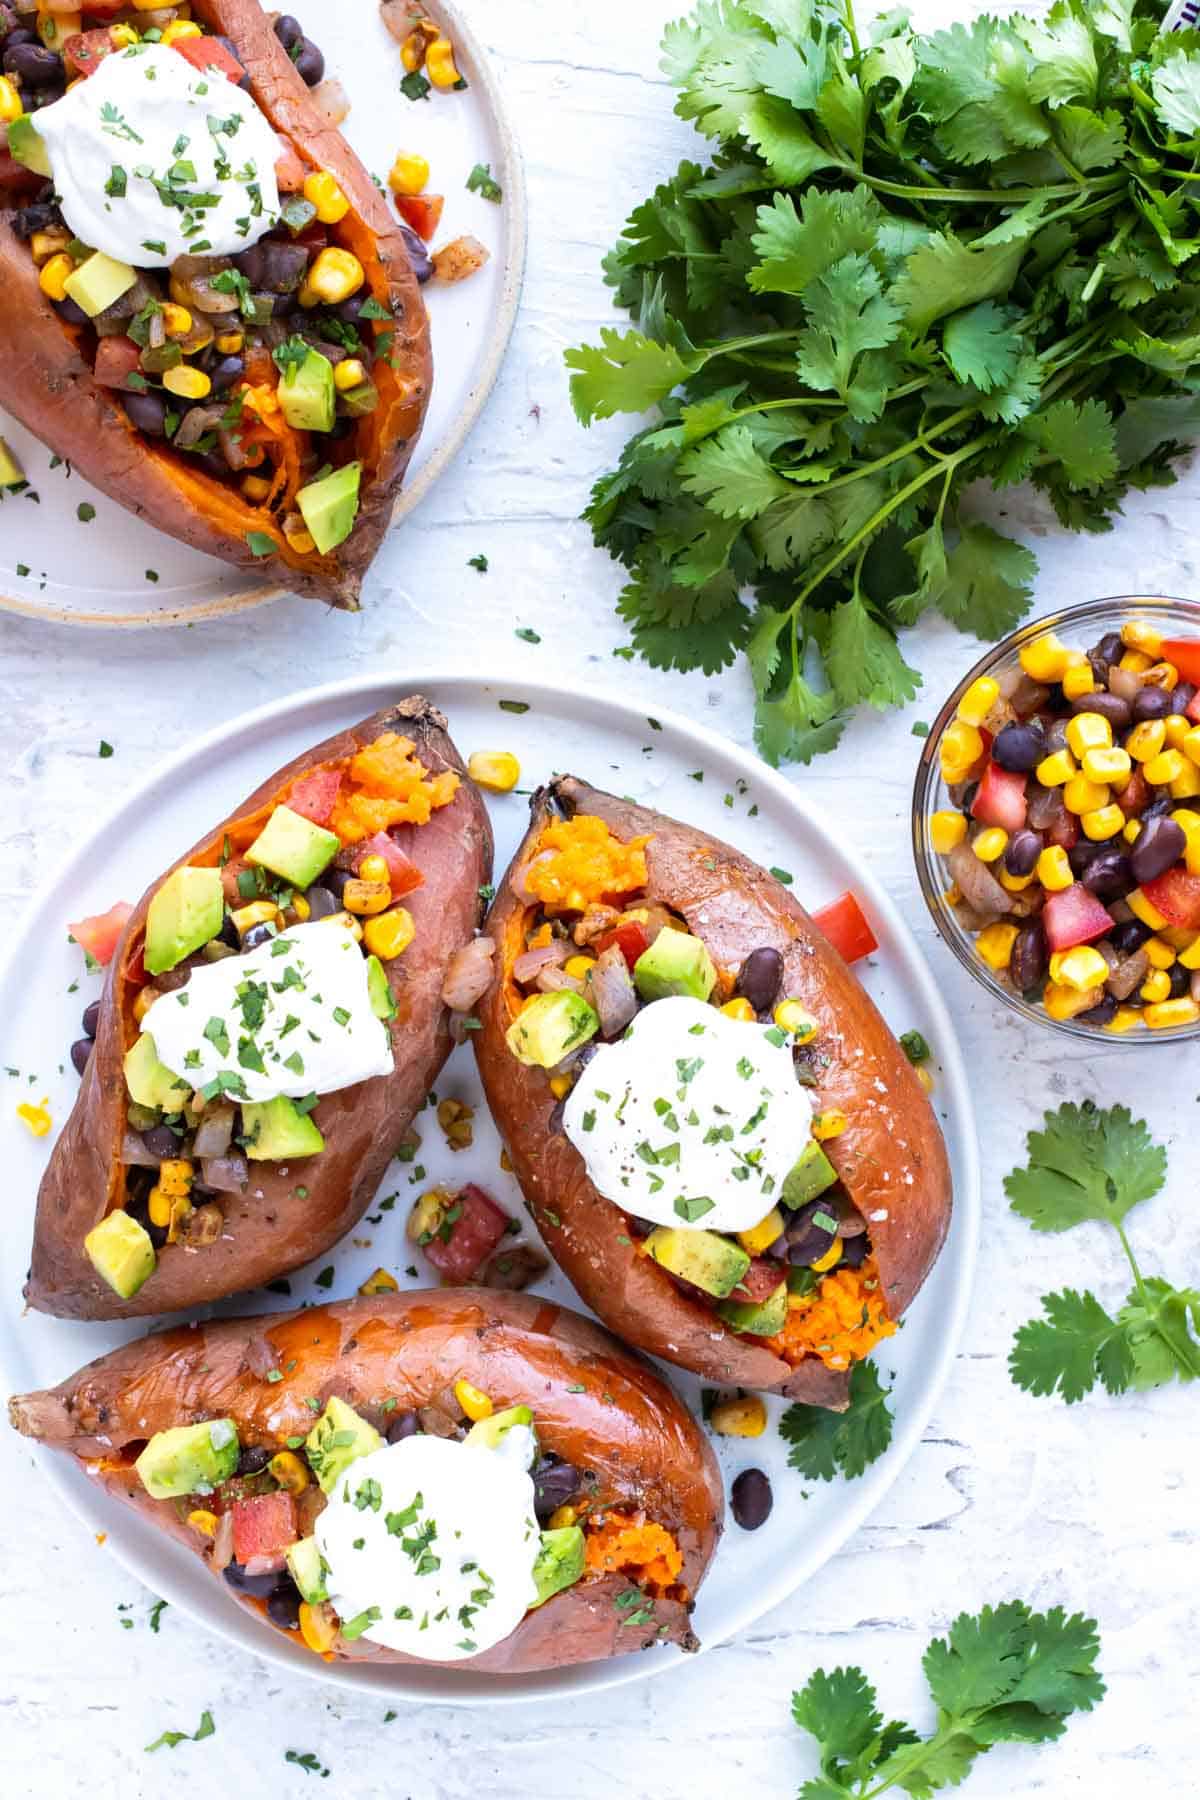 Three baked sweet potatoes stuffed with black beans, corn, and avocado.